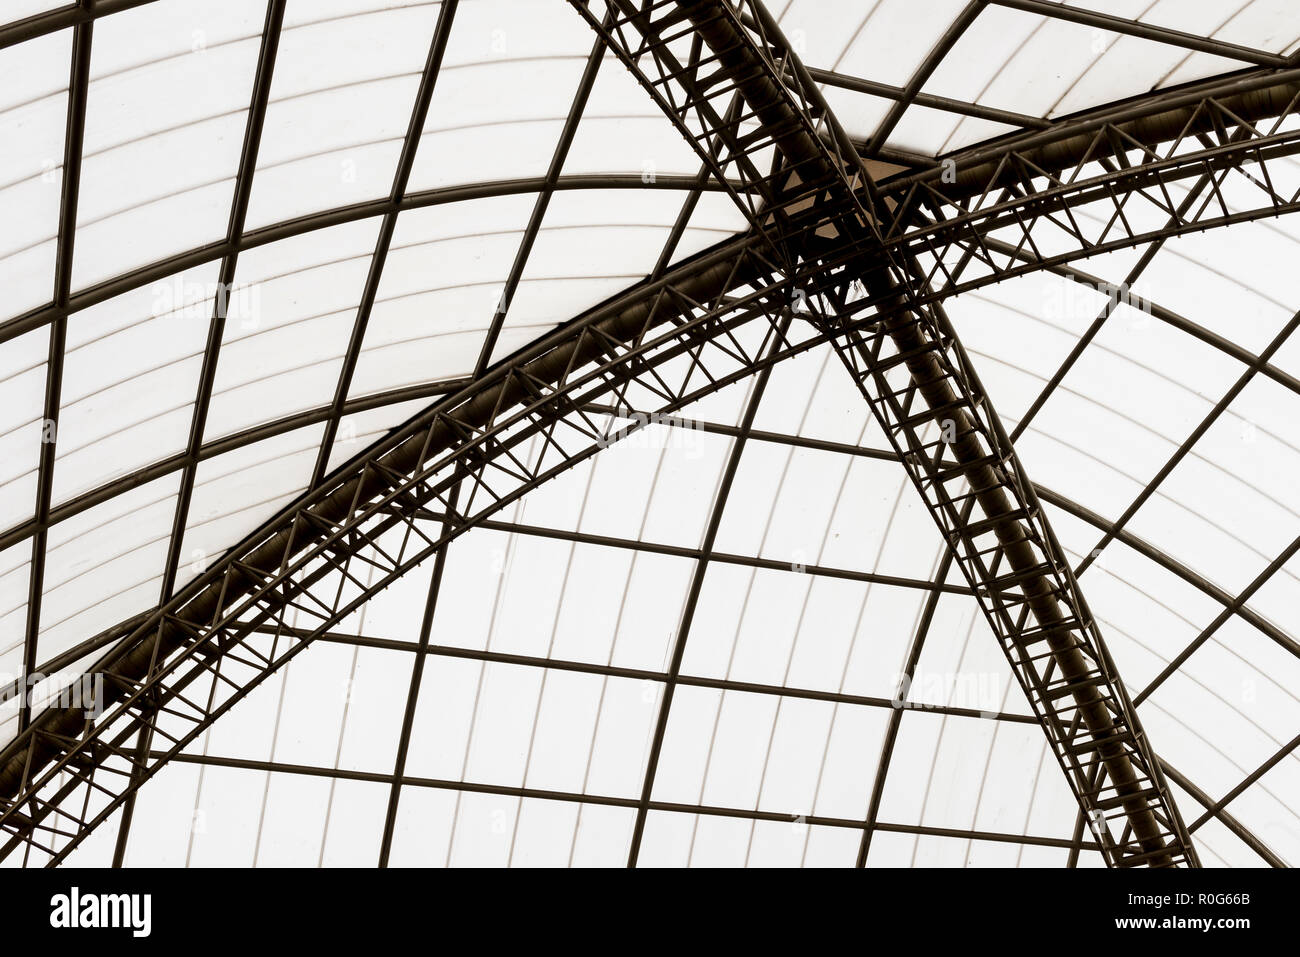 X shape architectural diffusion glass roof. Stock Photo